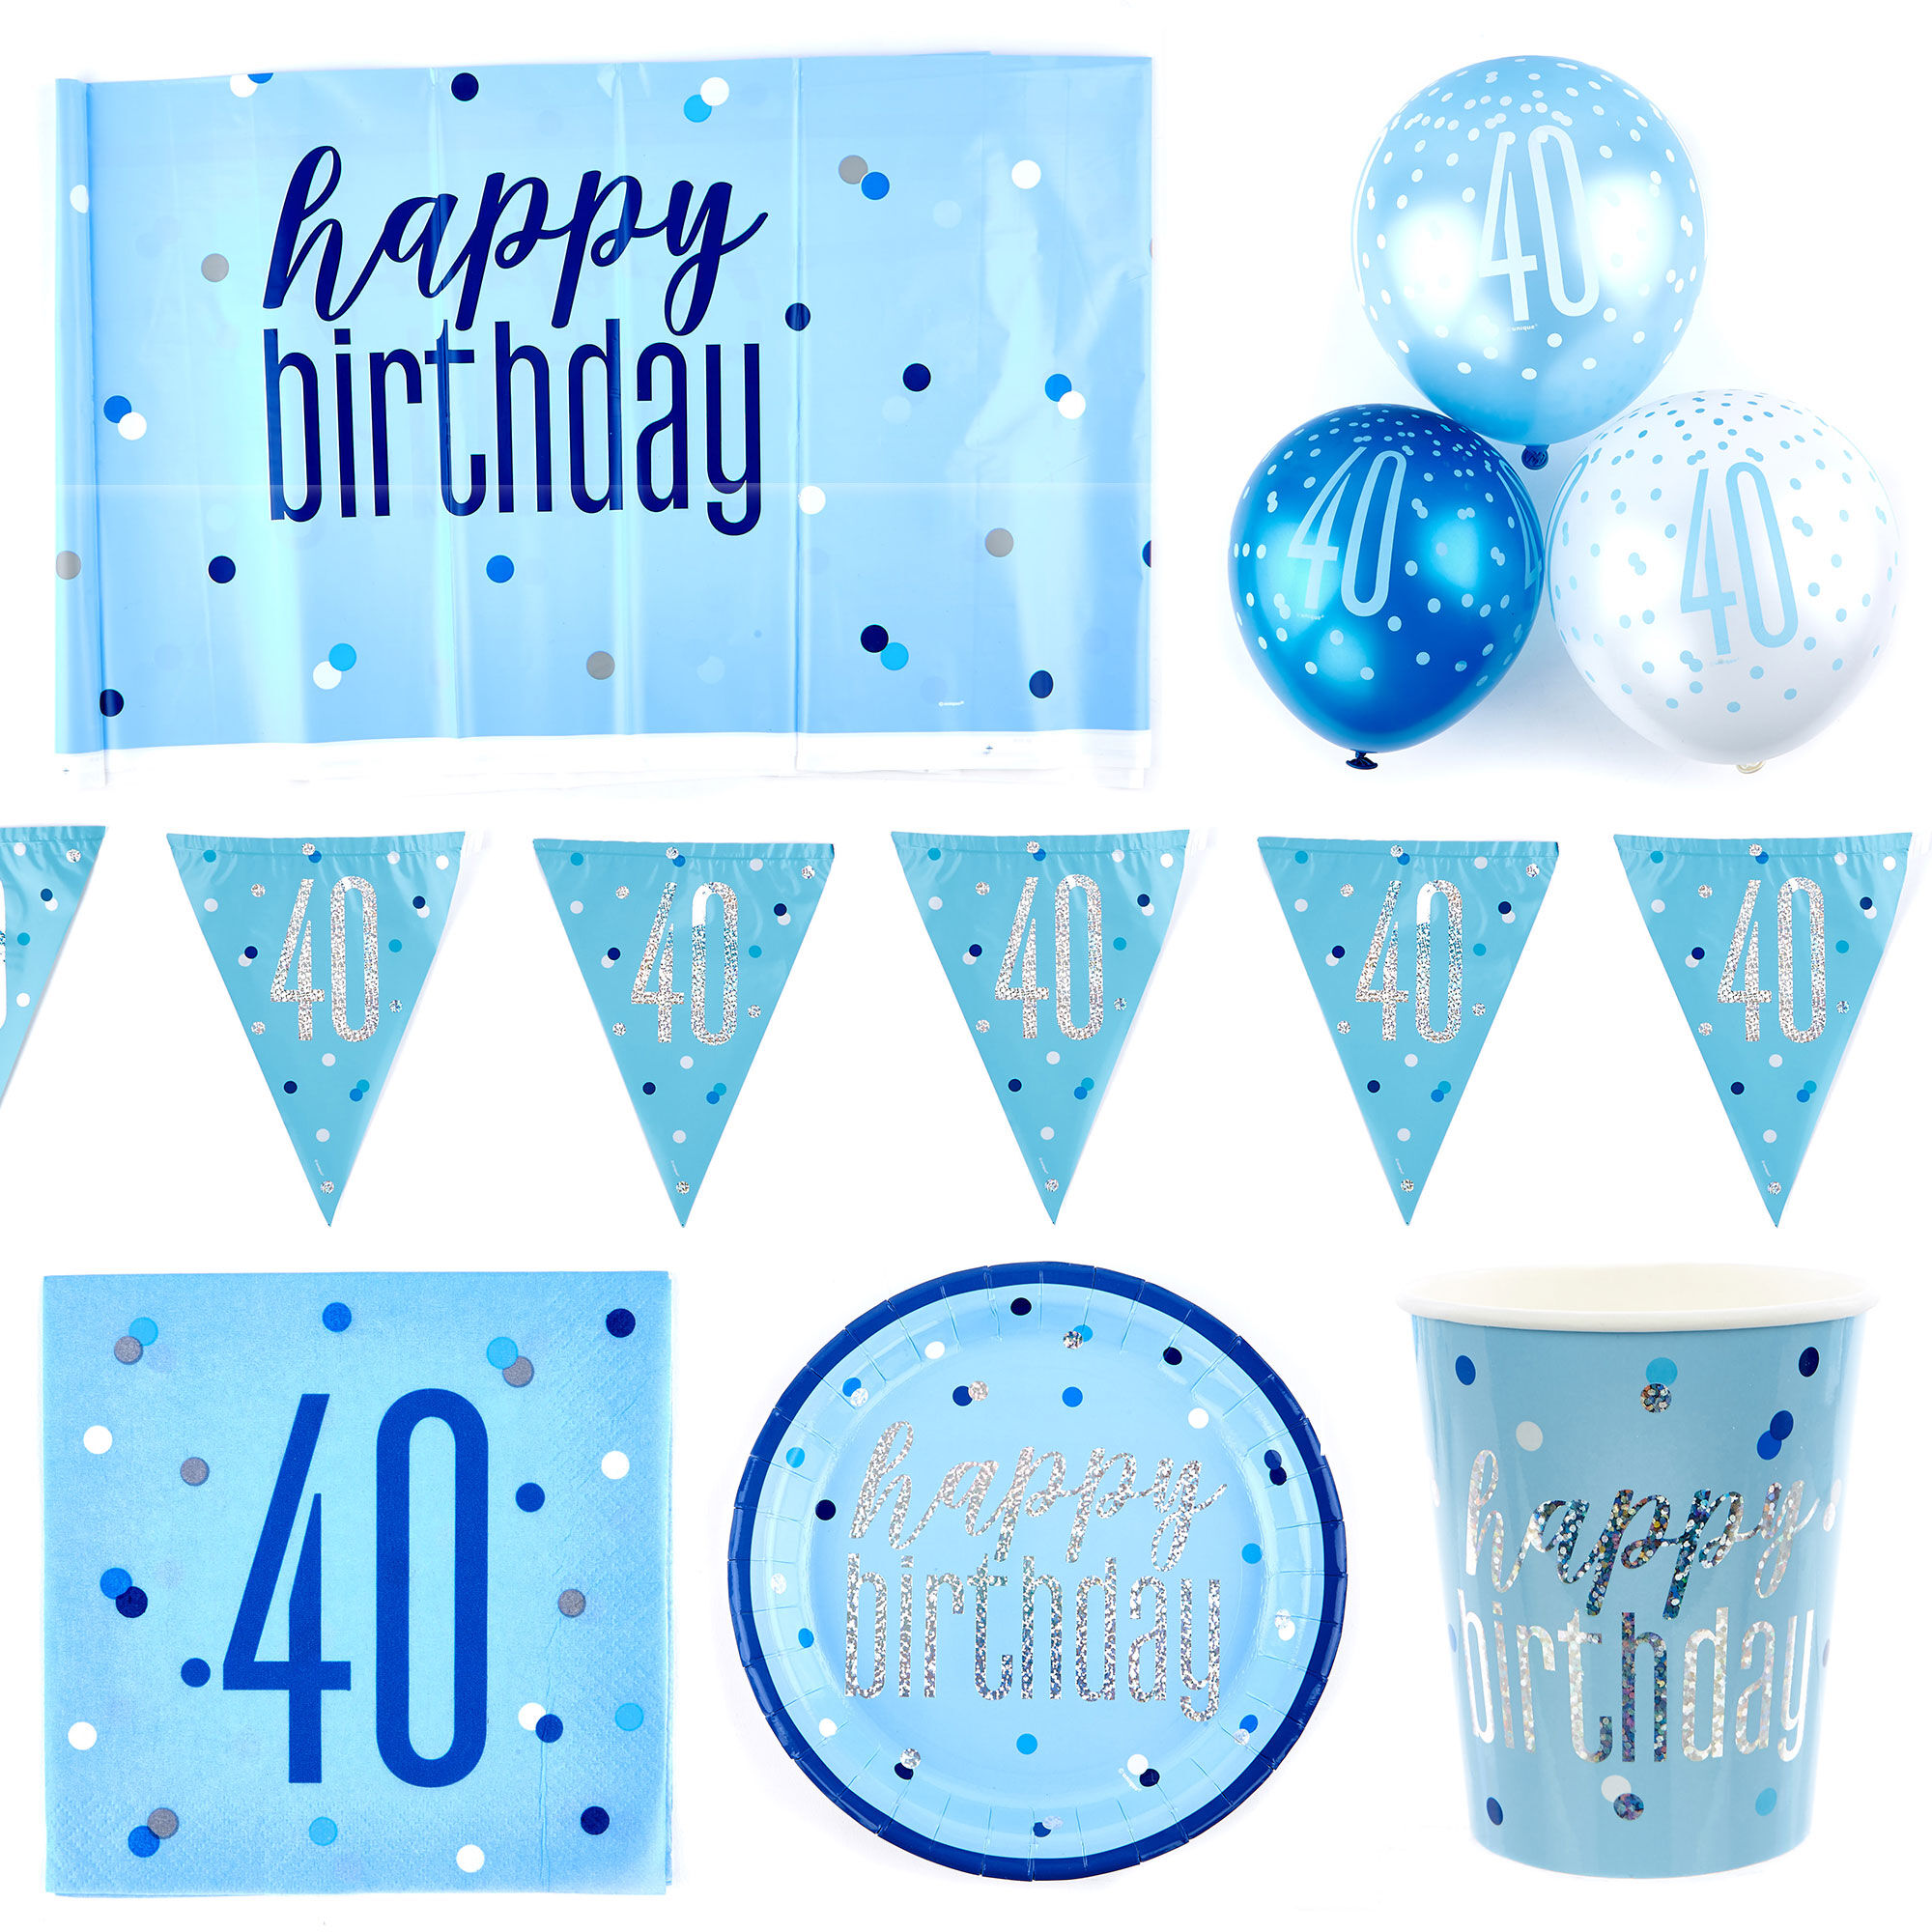 40th Birthday Decorations, 40th Birthday Party Decorations for Him & Her UK